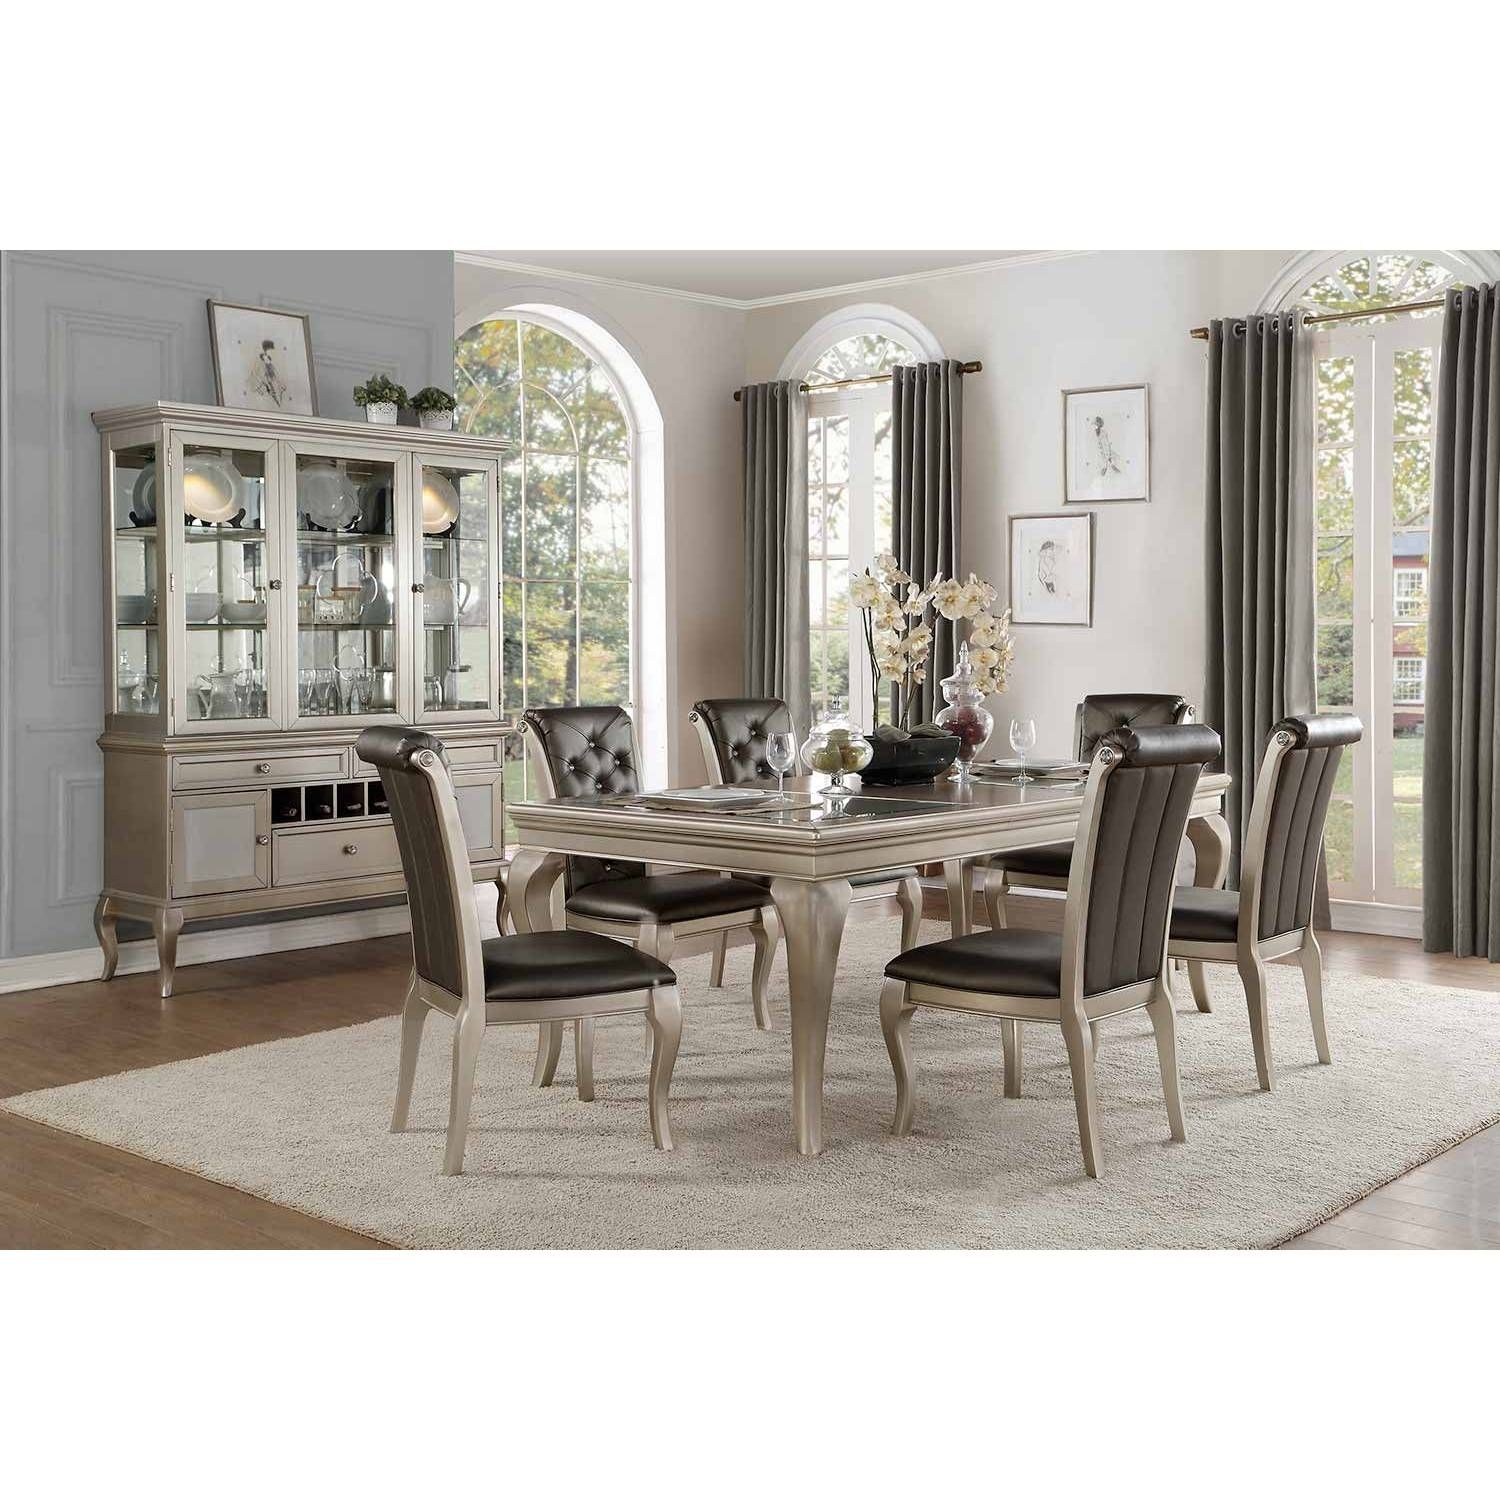 Crawford Group 7 Pc Dining Set Silver Regarding 2017 Crawford 7 Piece Rectangle Dining Sets (View 2 of 20)